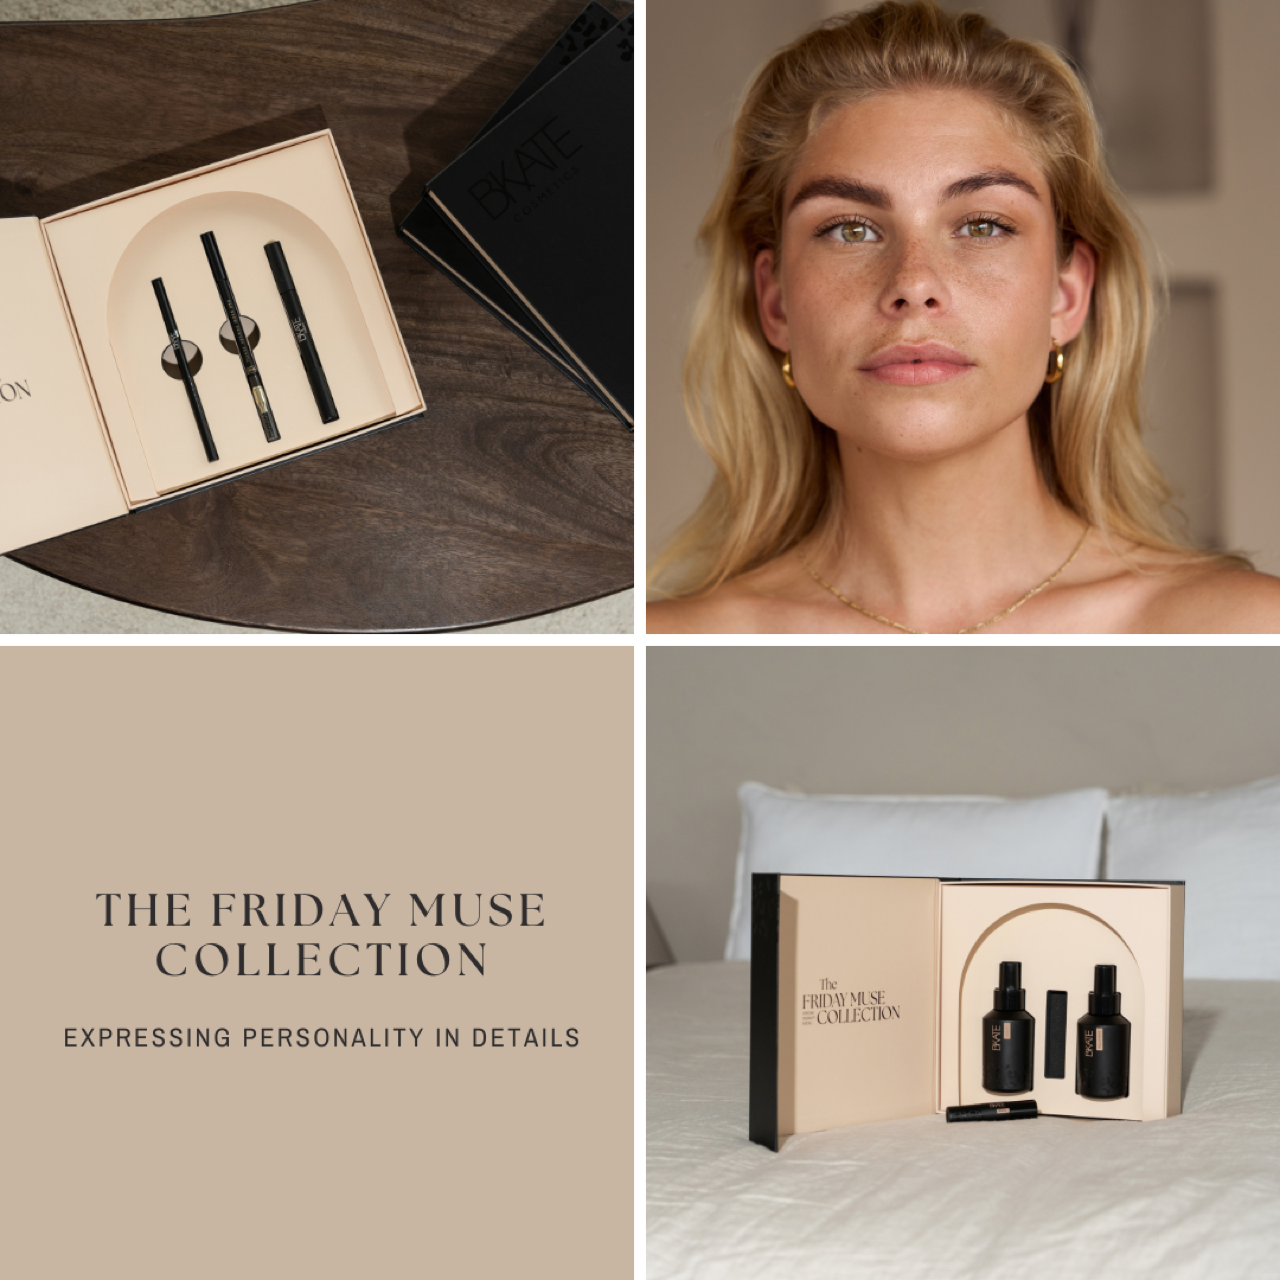 B'KATE FRIDAY MUSE COLLECTION Box (leer)